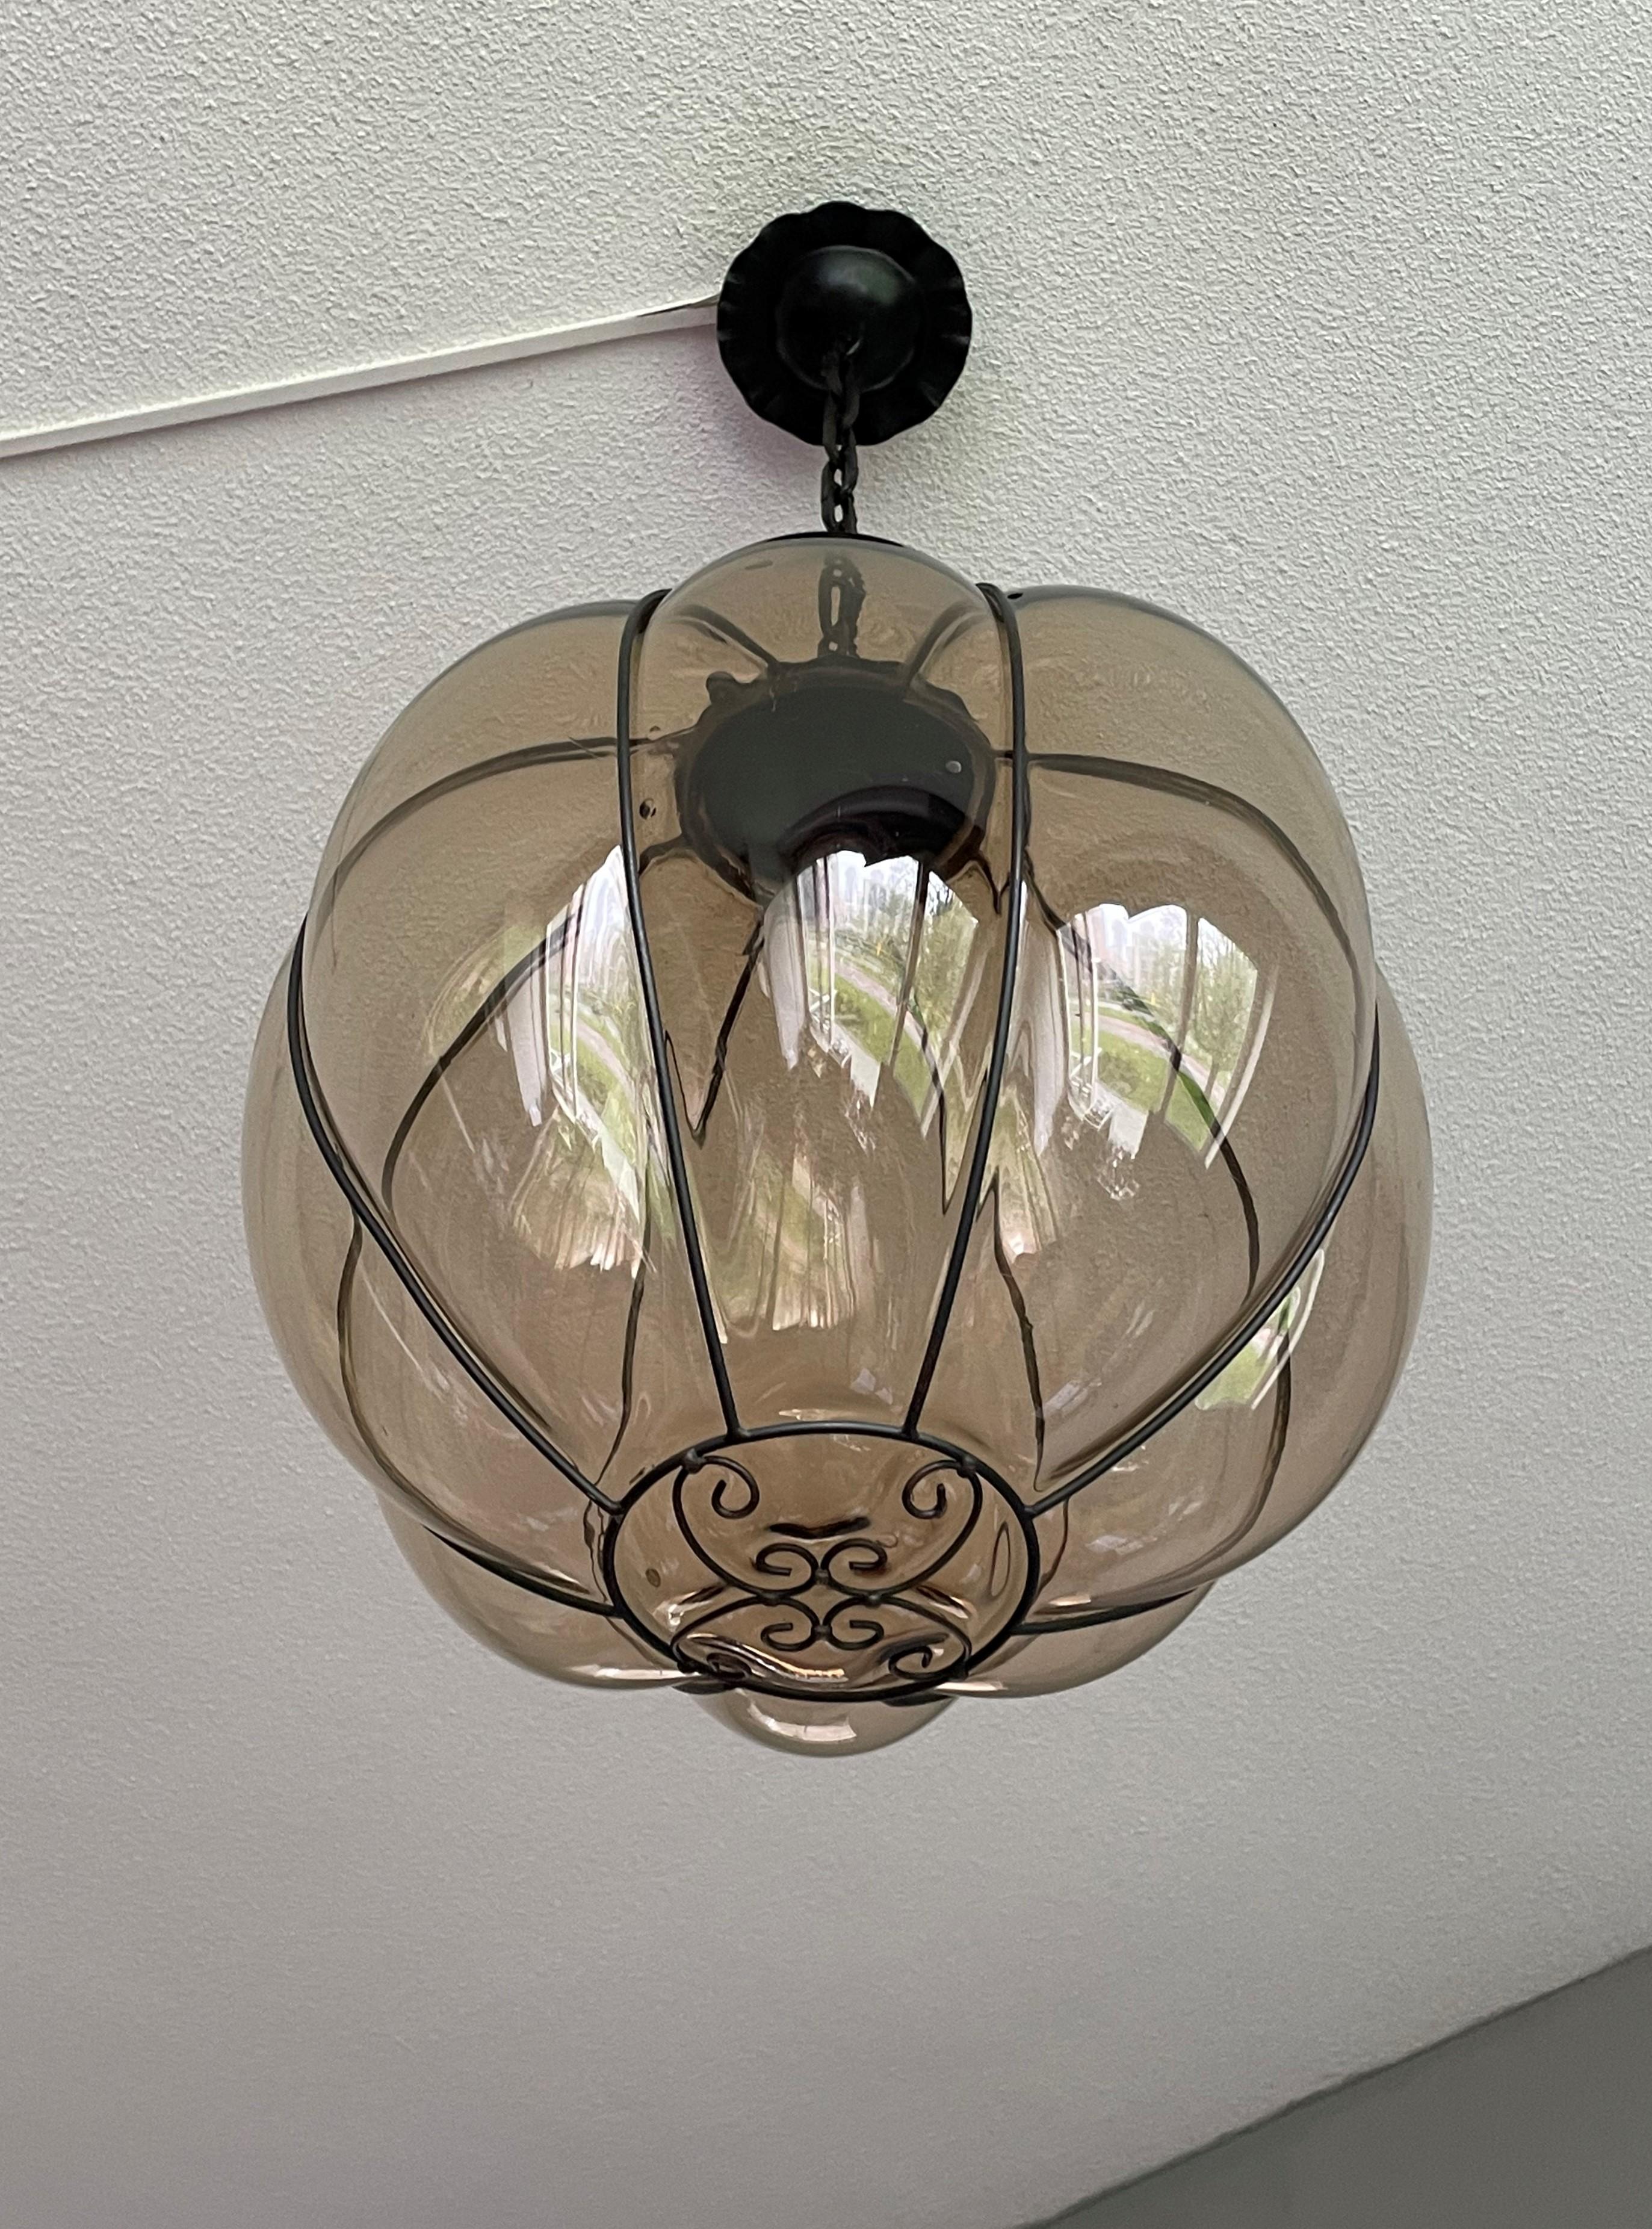 Rare Midcentury Venetian Mouth Blown Glass in Iron Frame Pendant / Chandelier For Sale 8